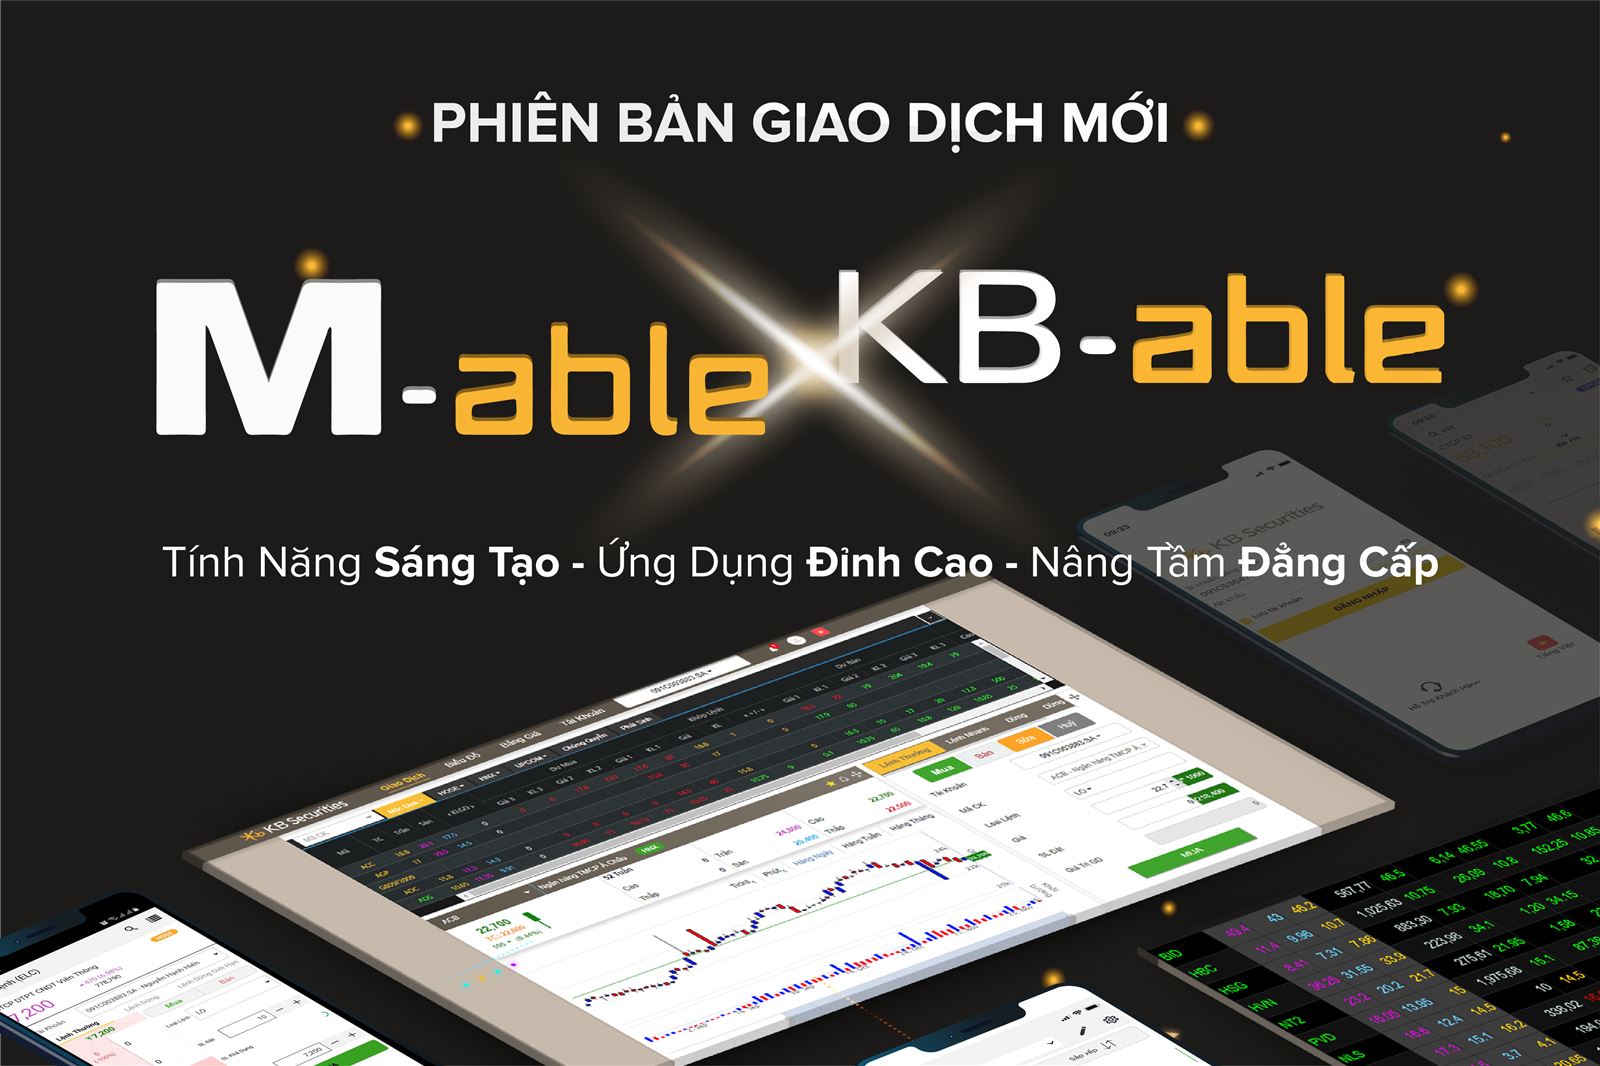 Kênh giao dịch KB-able & M-able